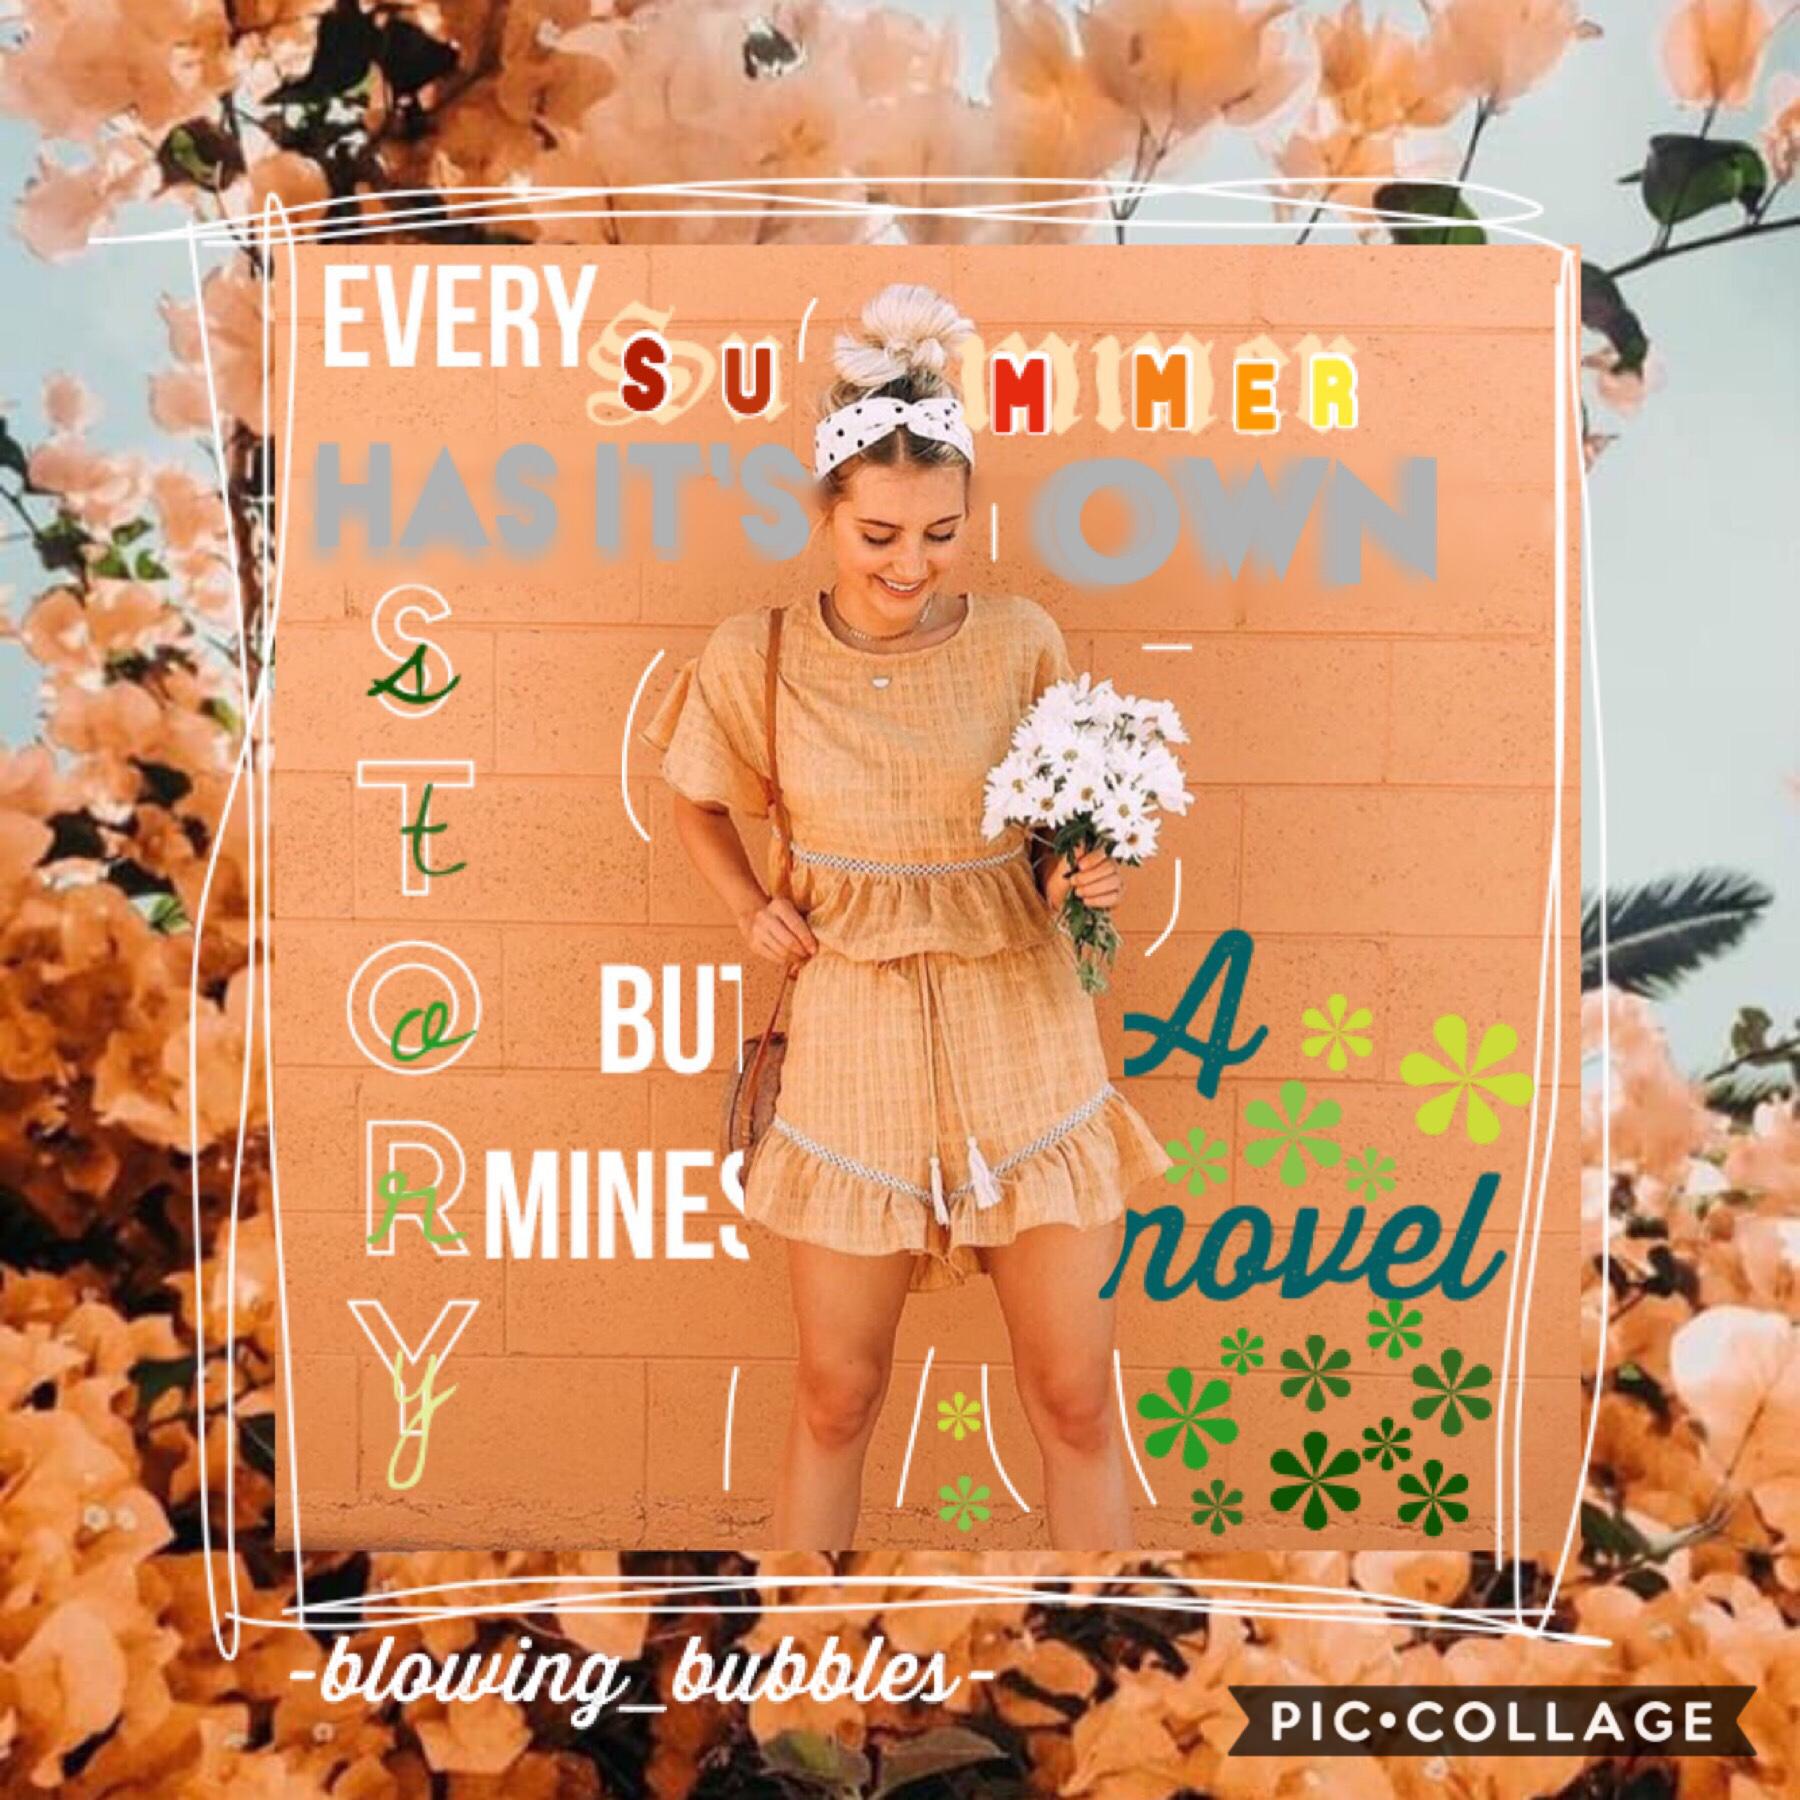 Hey guys!!!!!!! (Tap) 
🌌 shoutout to queenofsaturn go follow her she’s awesome 🌌
🧡if your happy and you know it clap you hands 👏 idk why i did that 😂🧡
🤟 thanks so much for all the likes on my collages 🤟
Comment 📦 for a shoutout!
QOTD: fav thing about summ